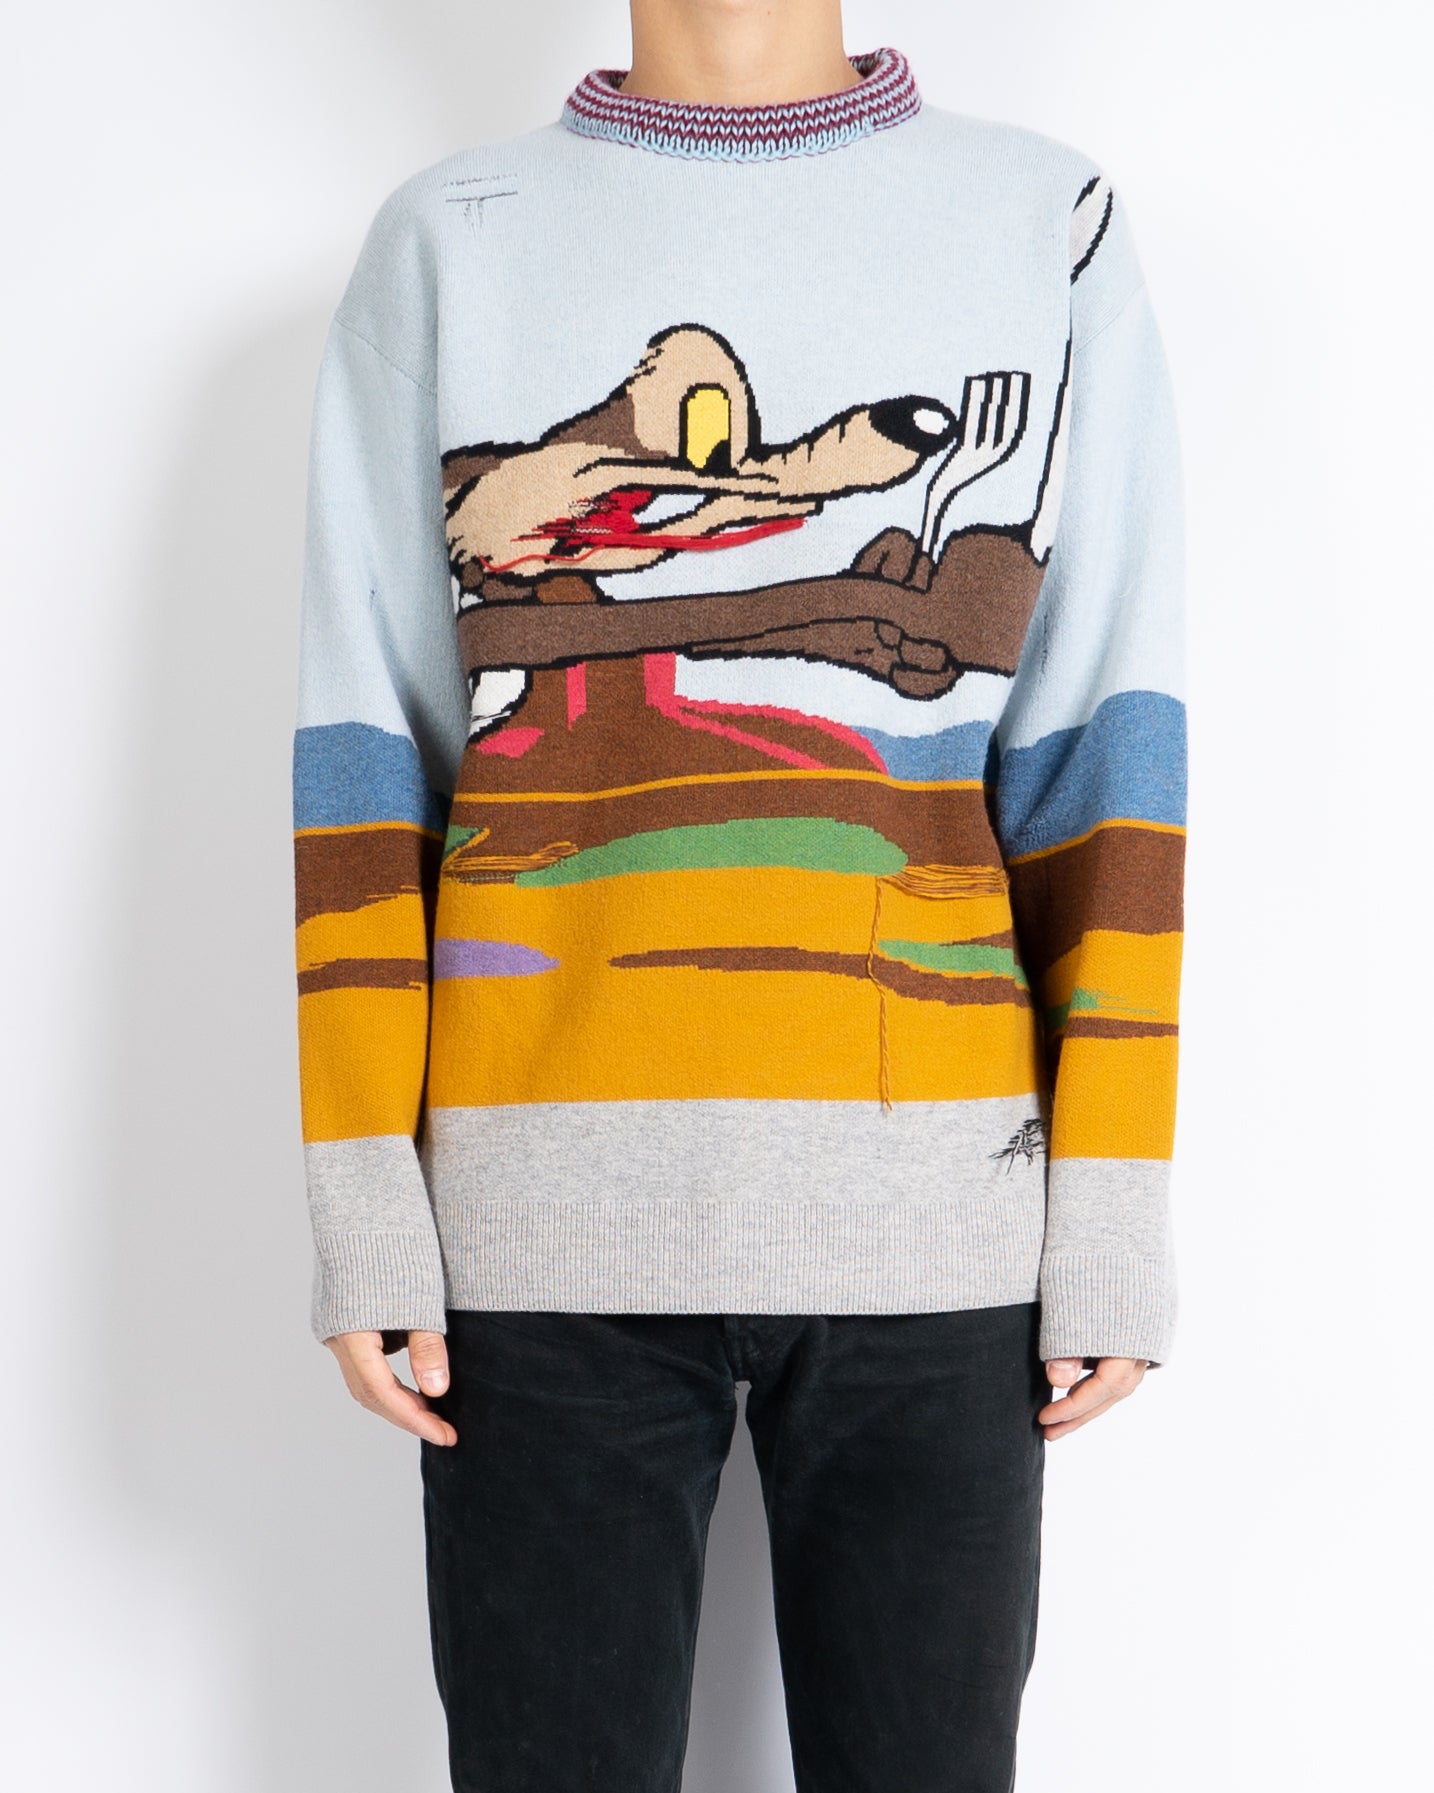 FW18 Coyote Distressed Looney Tunes Knit